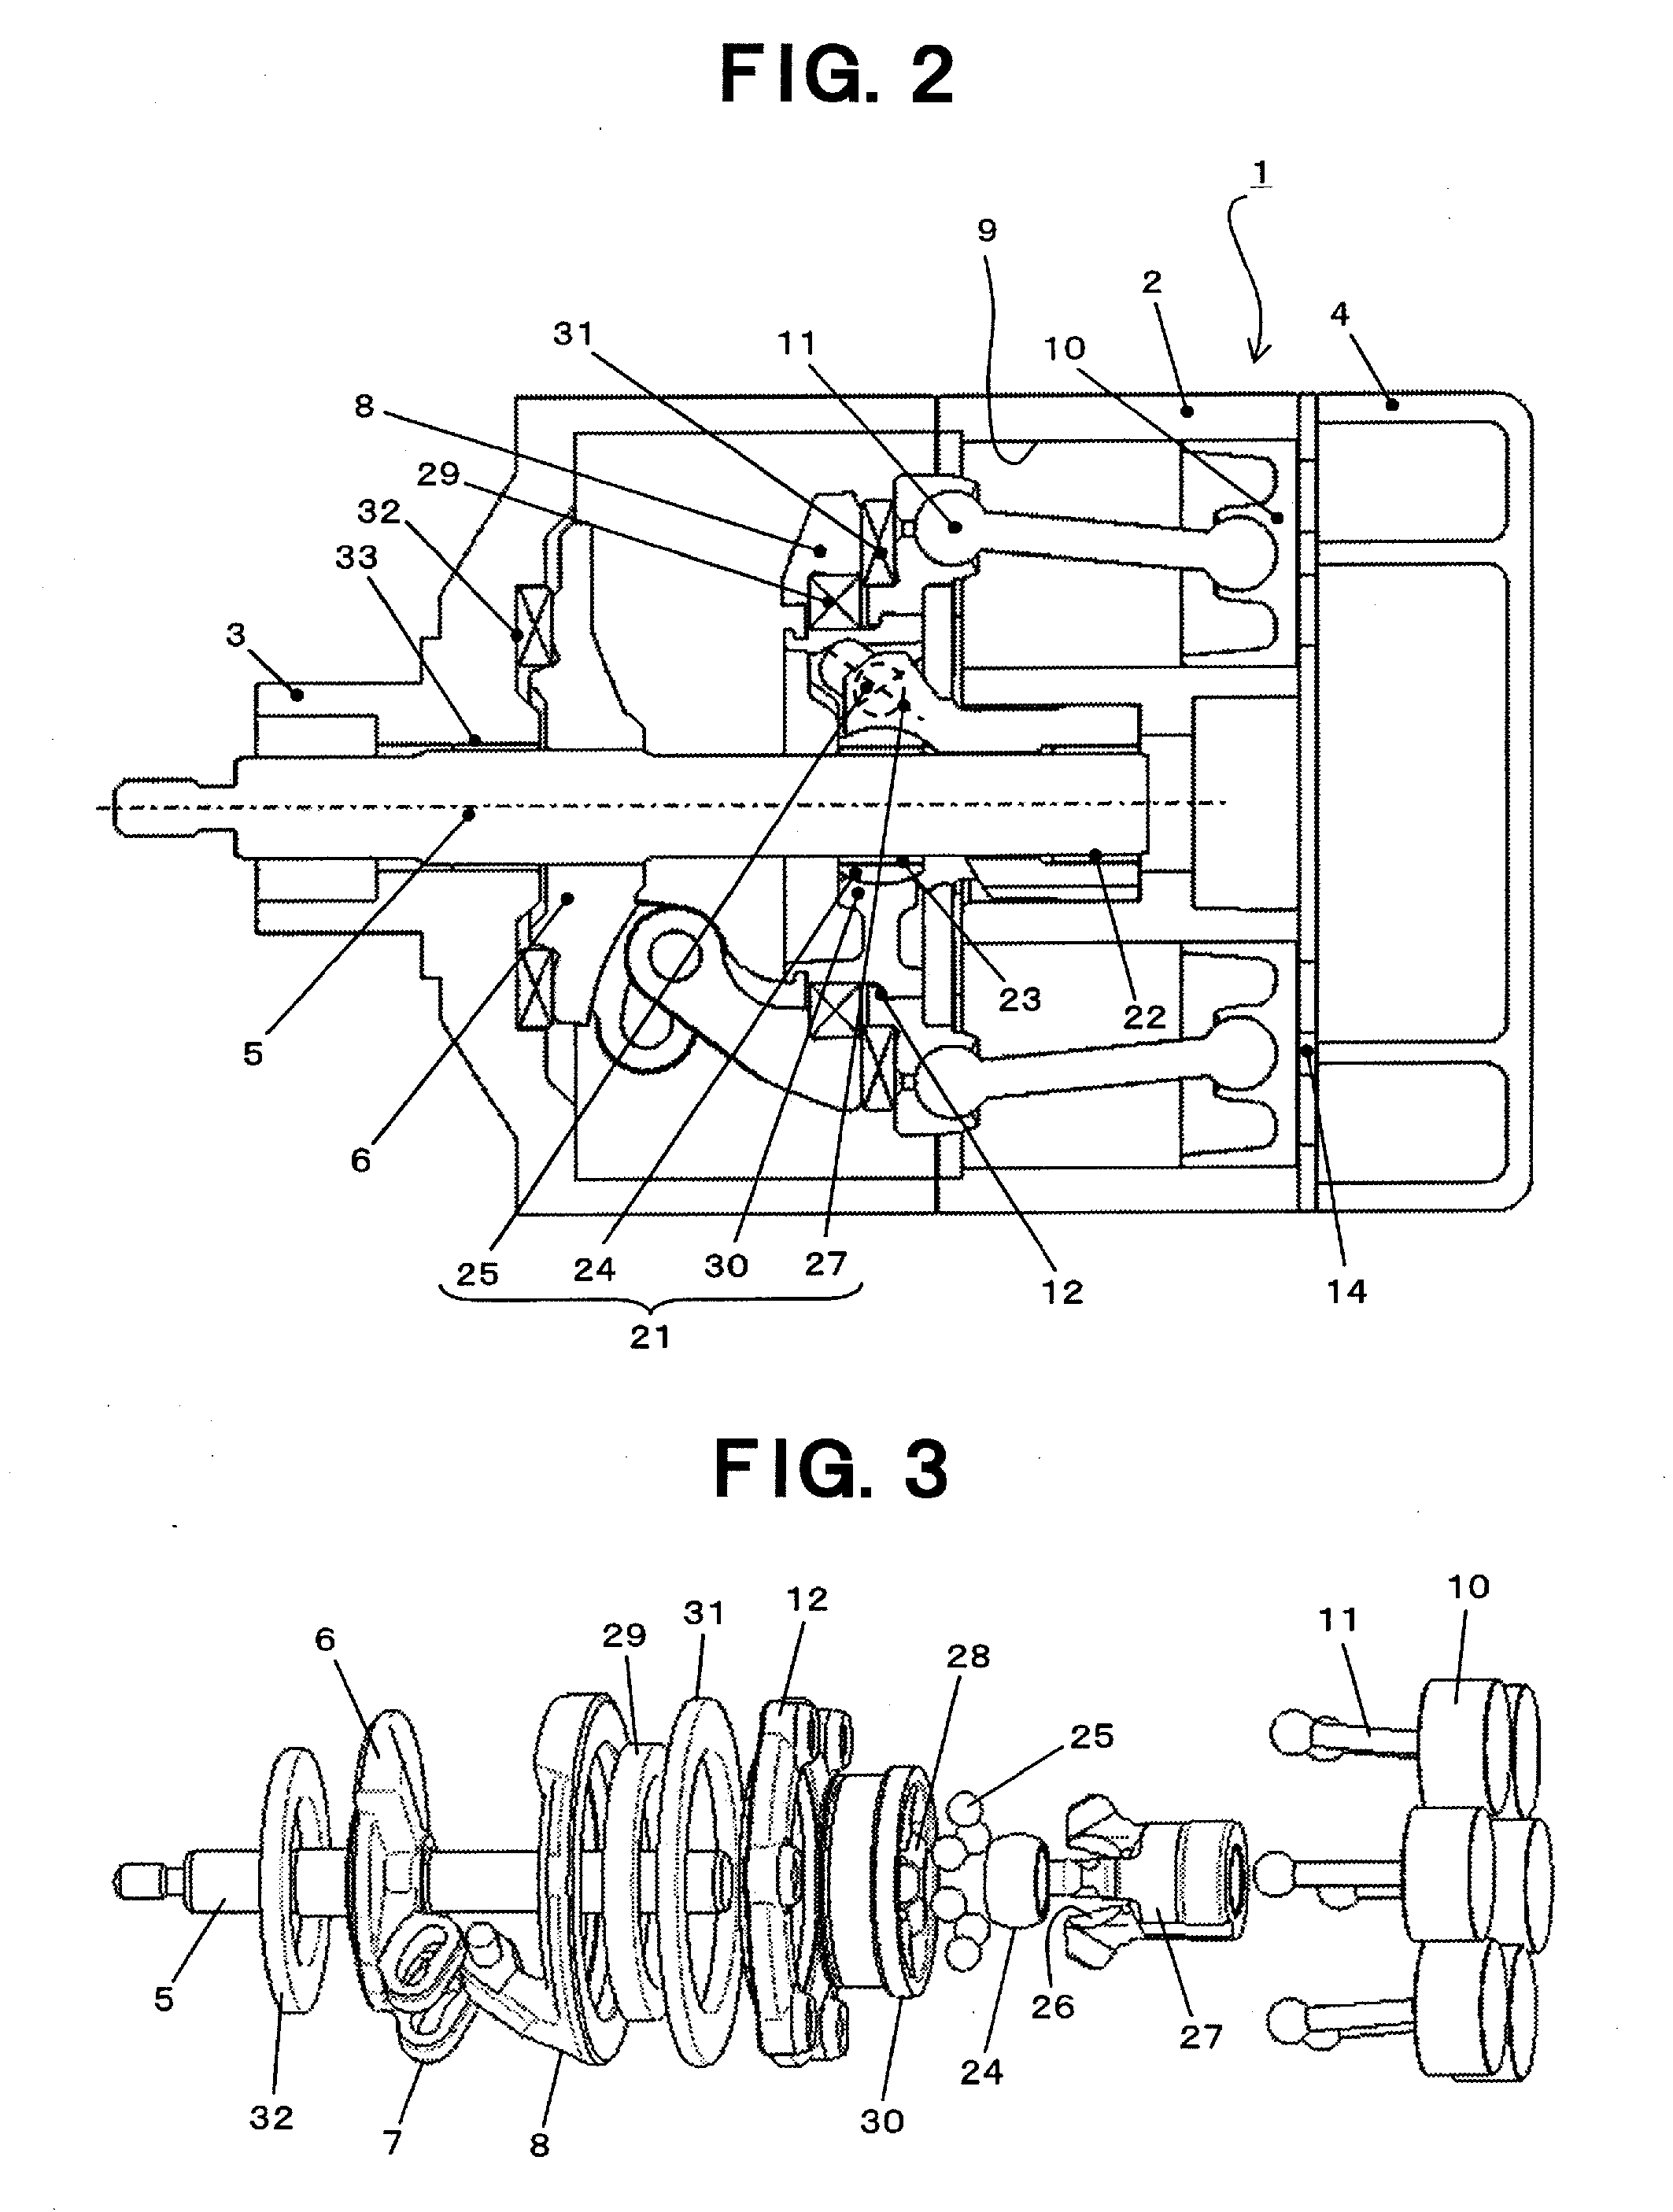 Wabble plate type variable displacement compressor